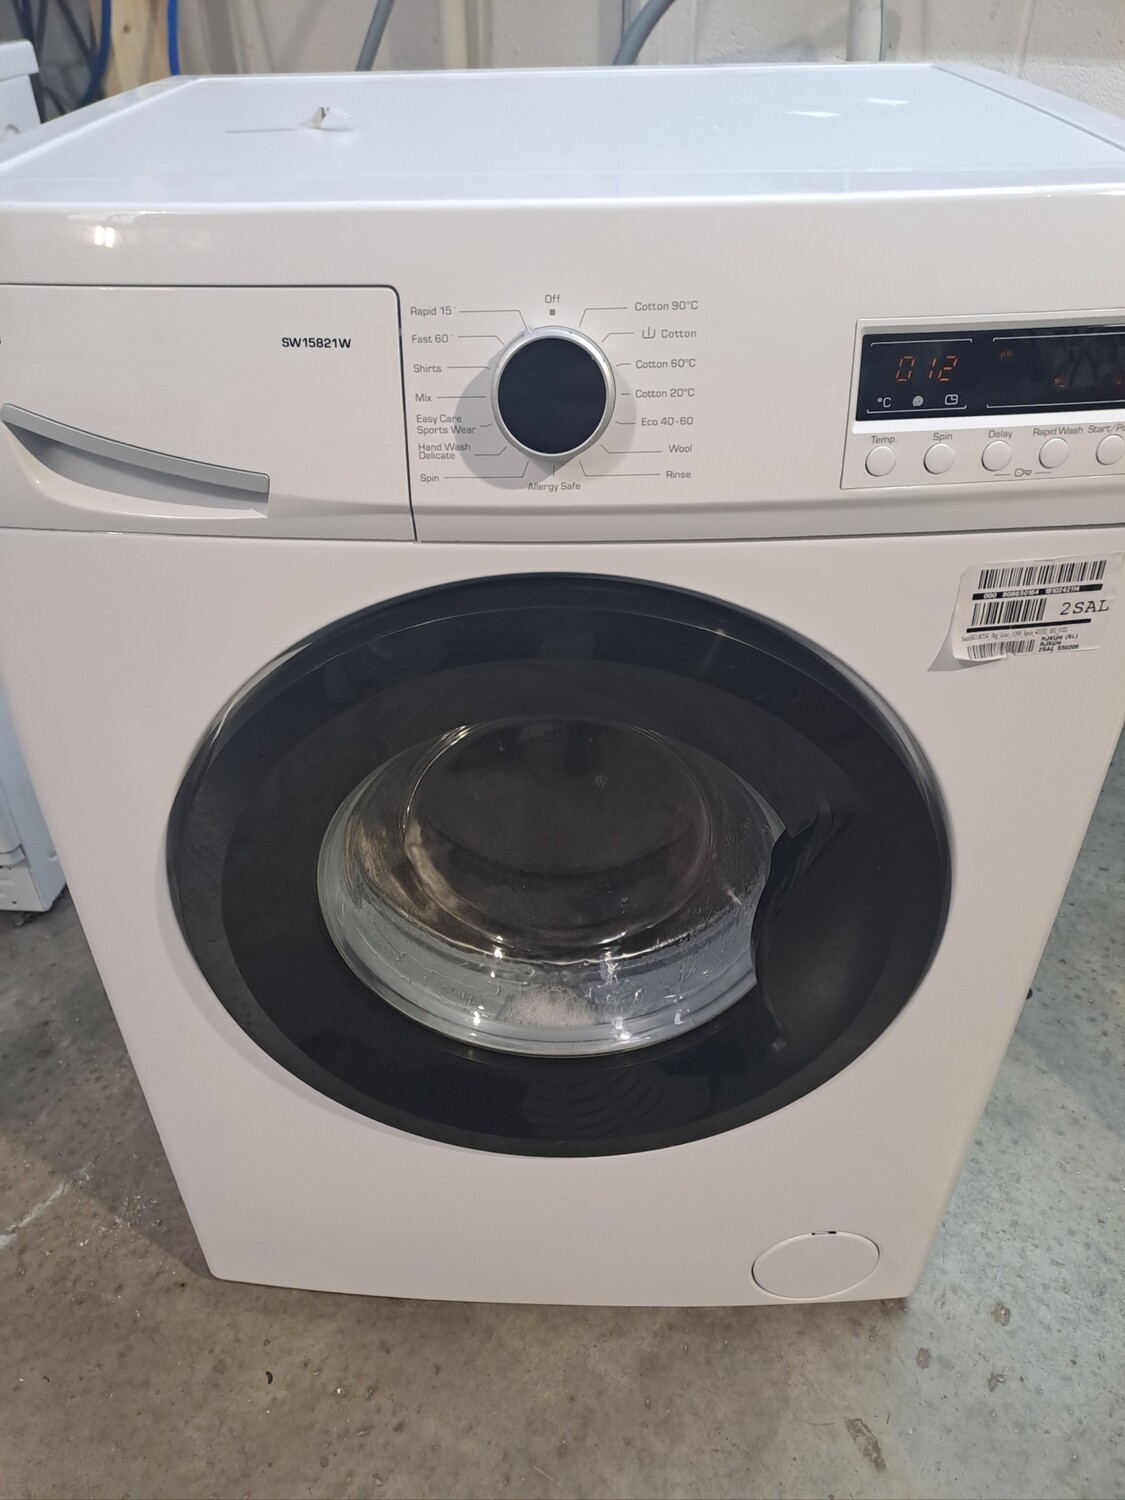 Swan SW15821W 7kg Load, 1200 Spin Washing Machine - White - New Graded + 1 Year Guarantee. This item is located at our Whitby Road Shop